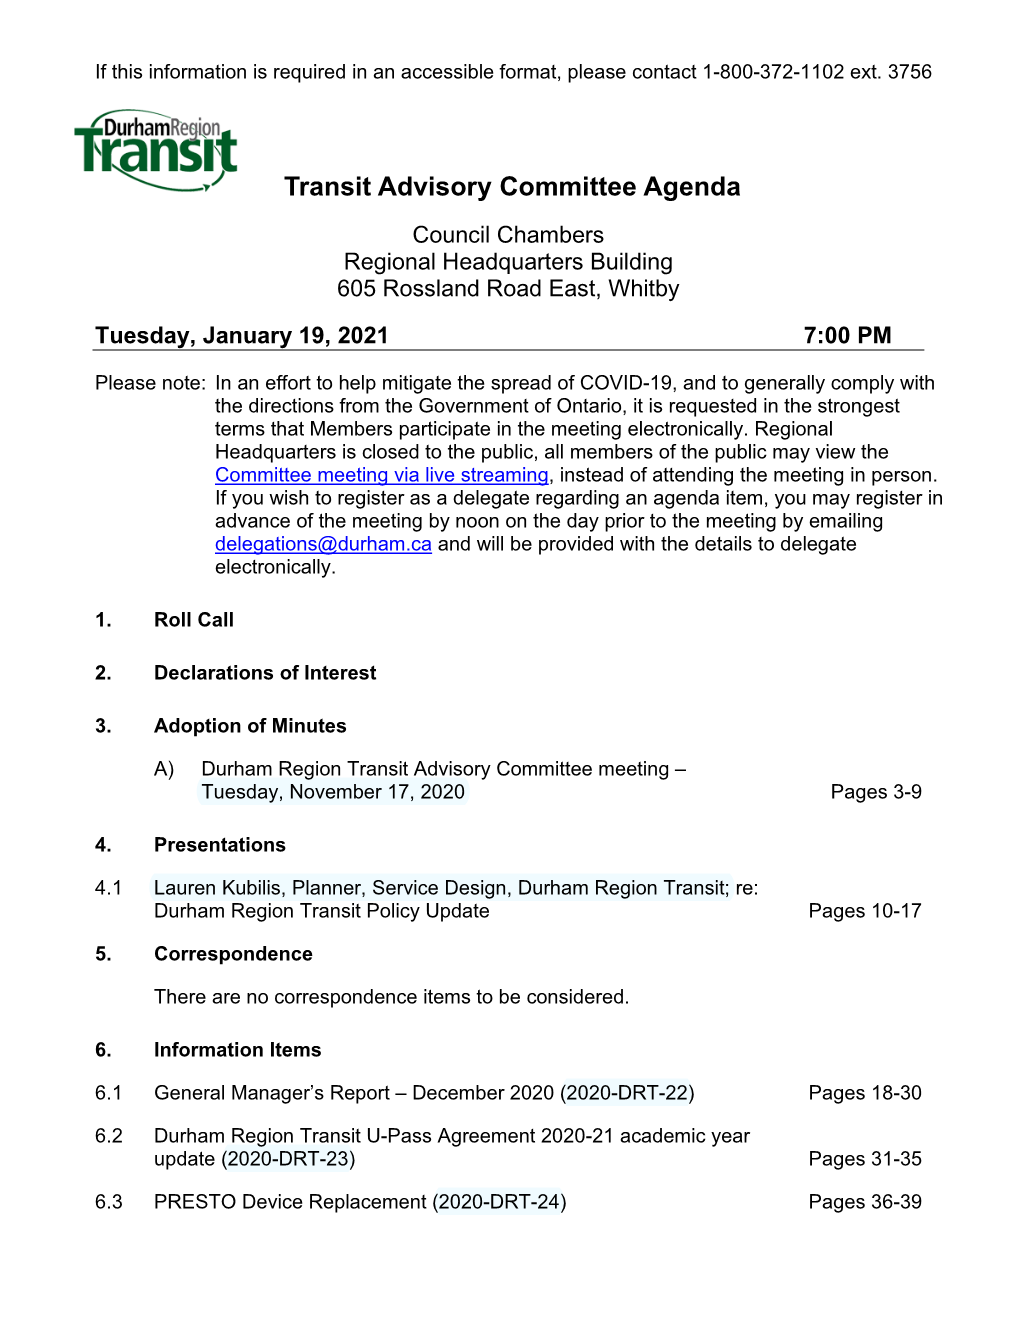 Transit Advisory Committee Agenda Council Chambers Regional Headquarters Building 605 Rossland Road East, Whitby